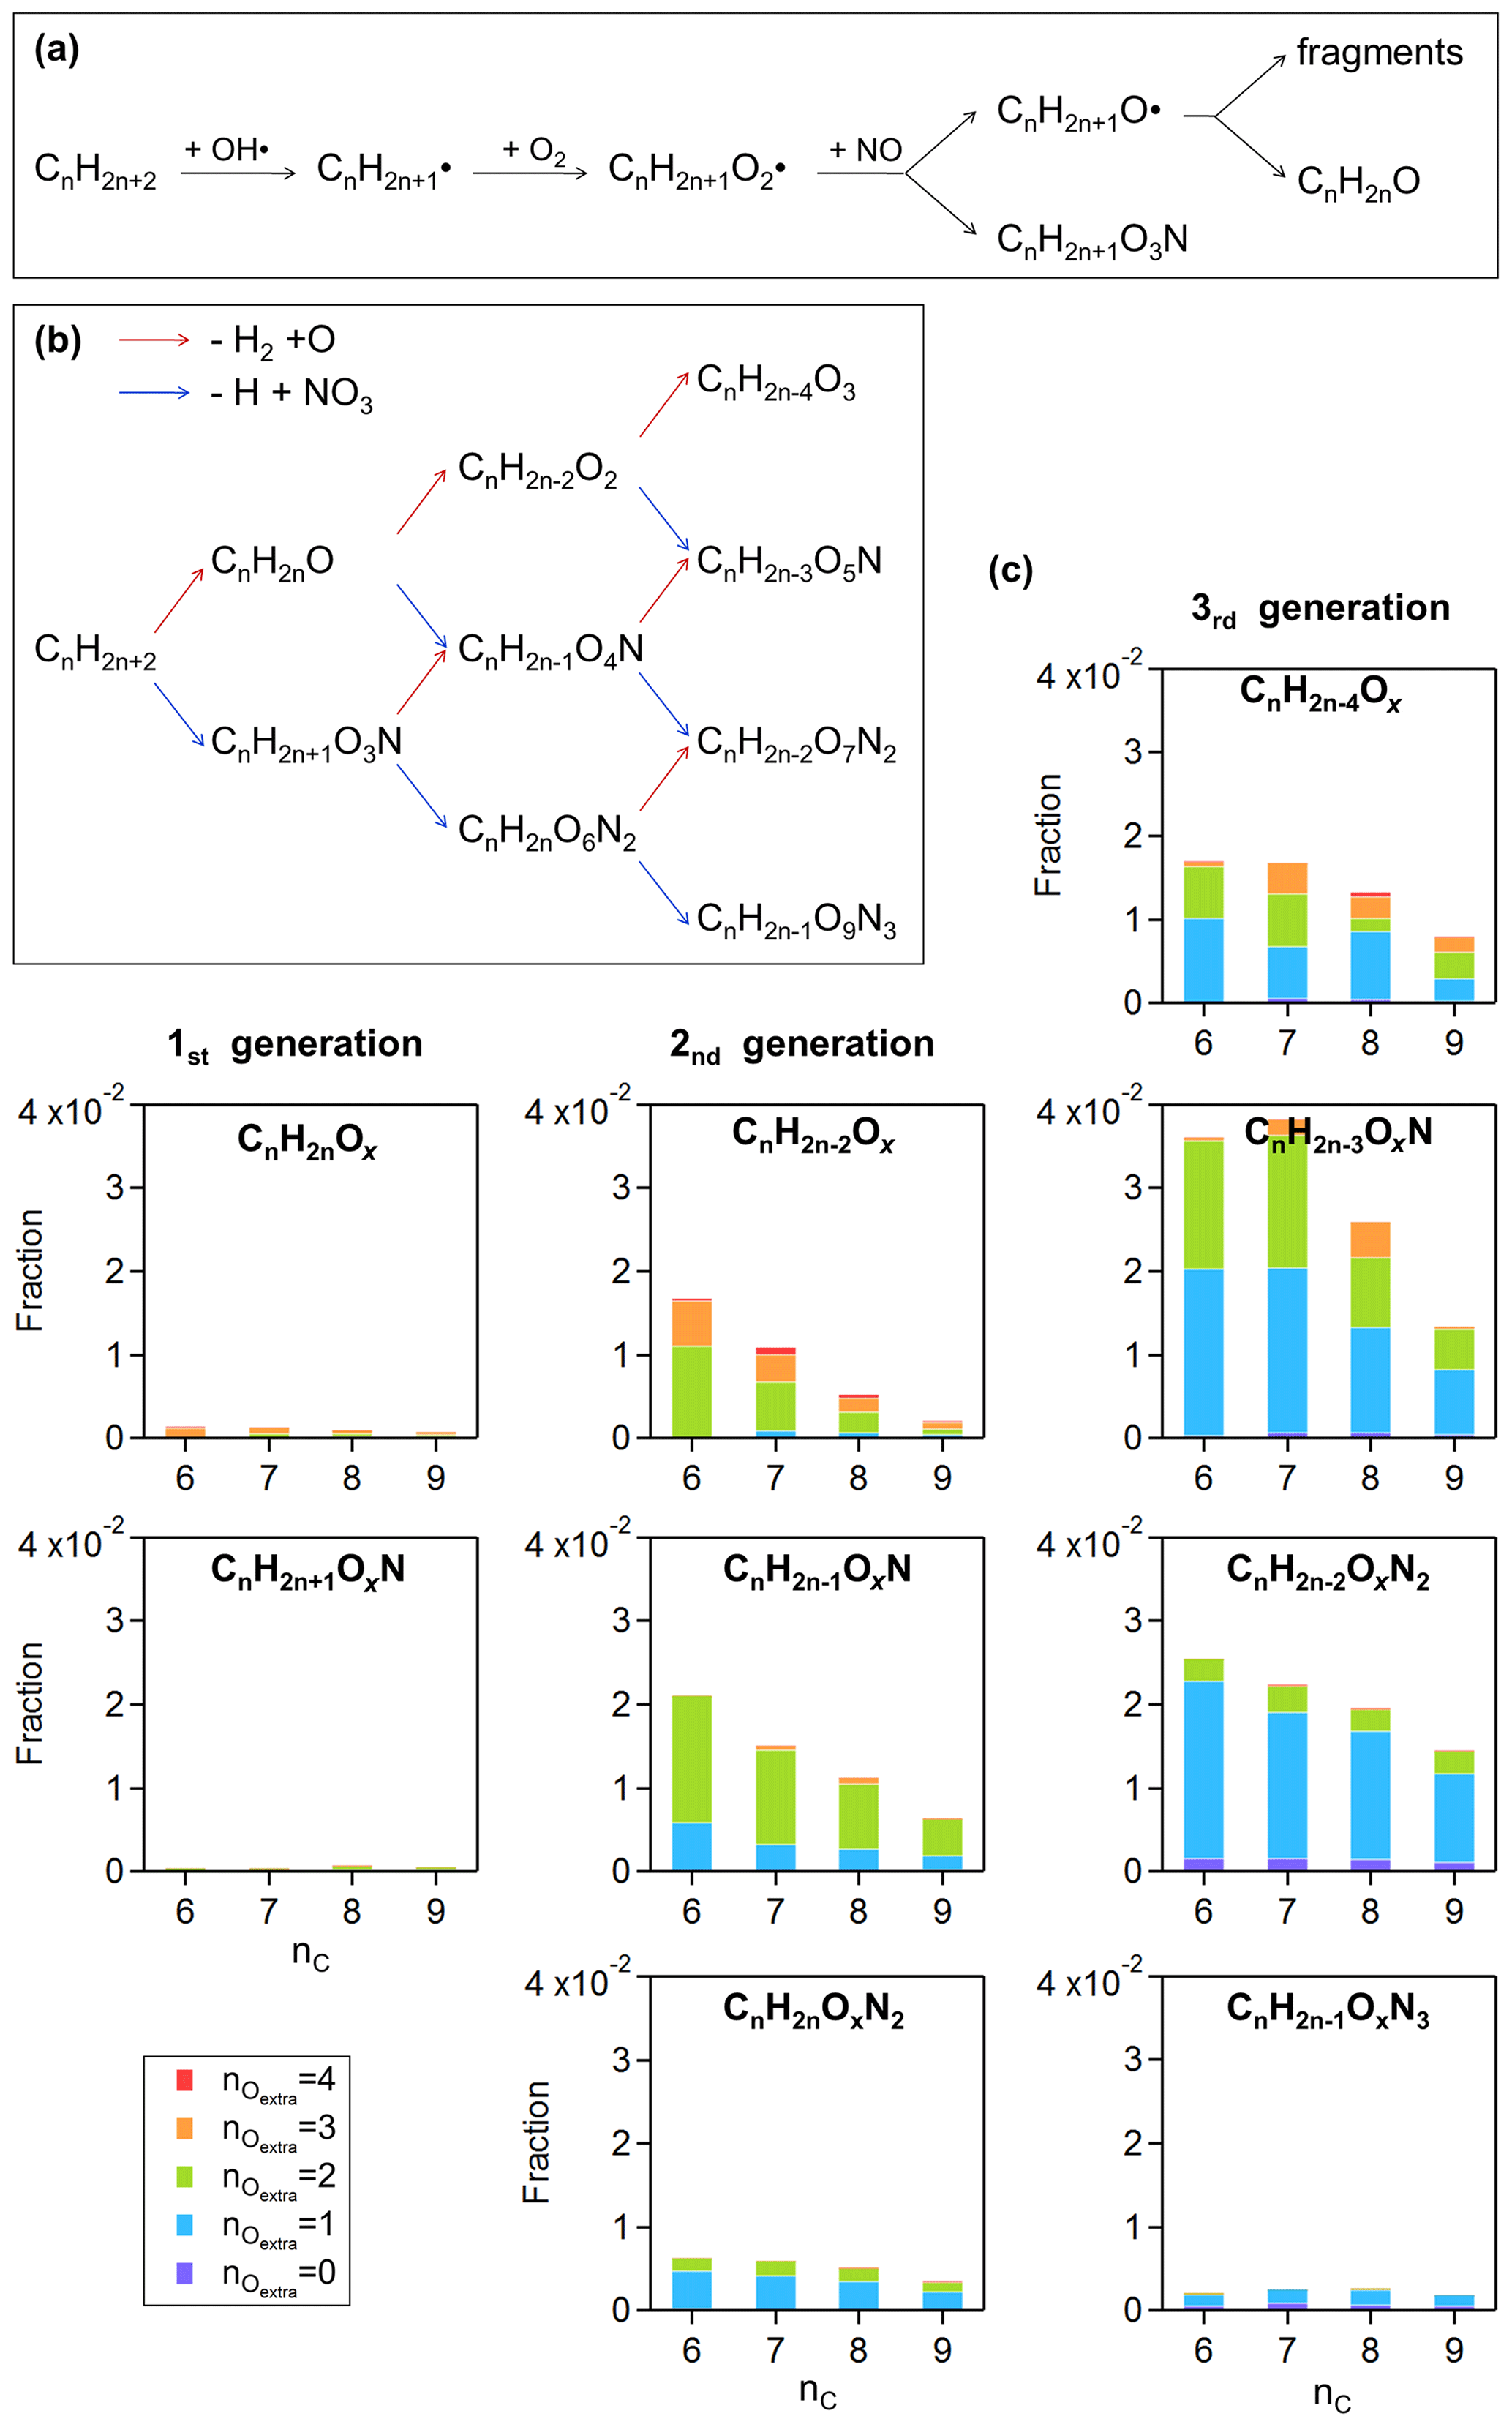 ACP - Formation of condensable organic vapors from anthropogenic 